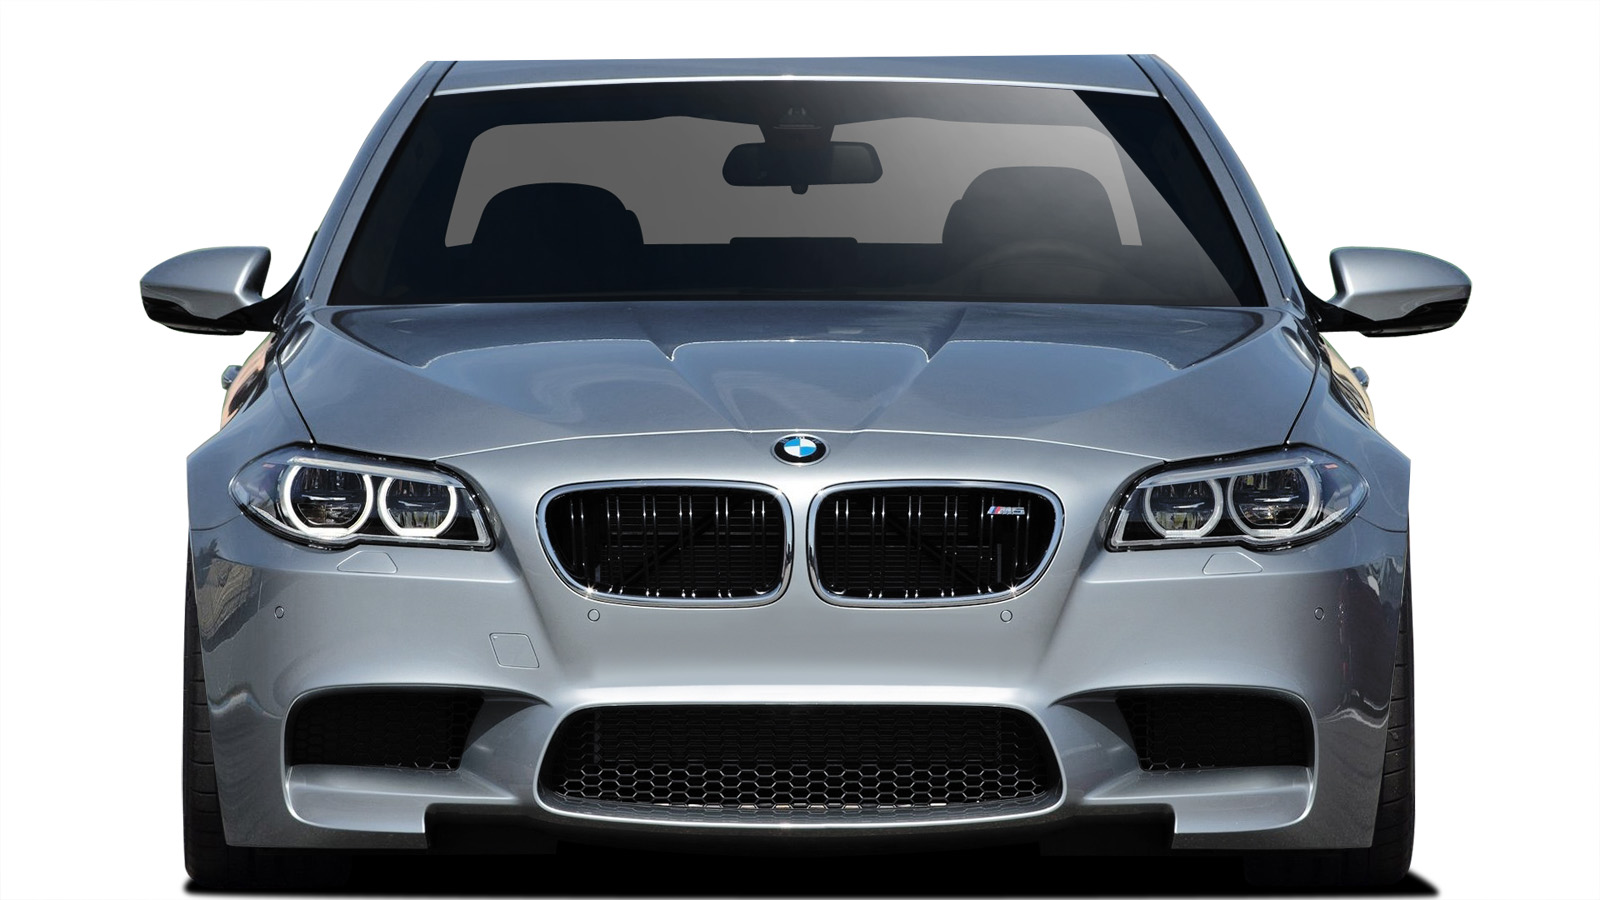 2013 BMW 5 Series ALL - Polypropylene Front Bumper Bodykit - BMW 5 Series F10 Vaero M5 Look Conversion Front Bumper Cover ( with PDC , with Washer , w